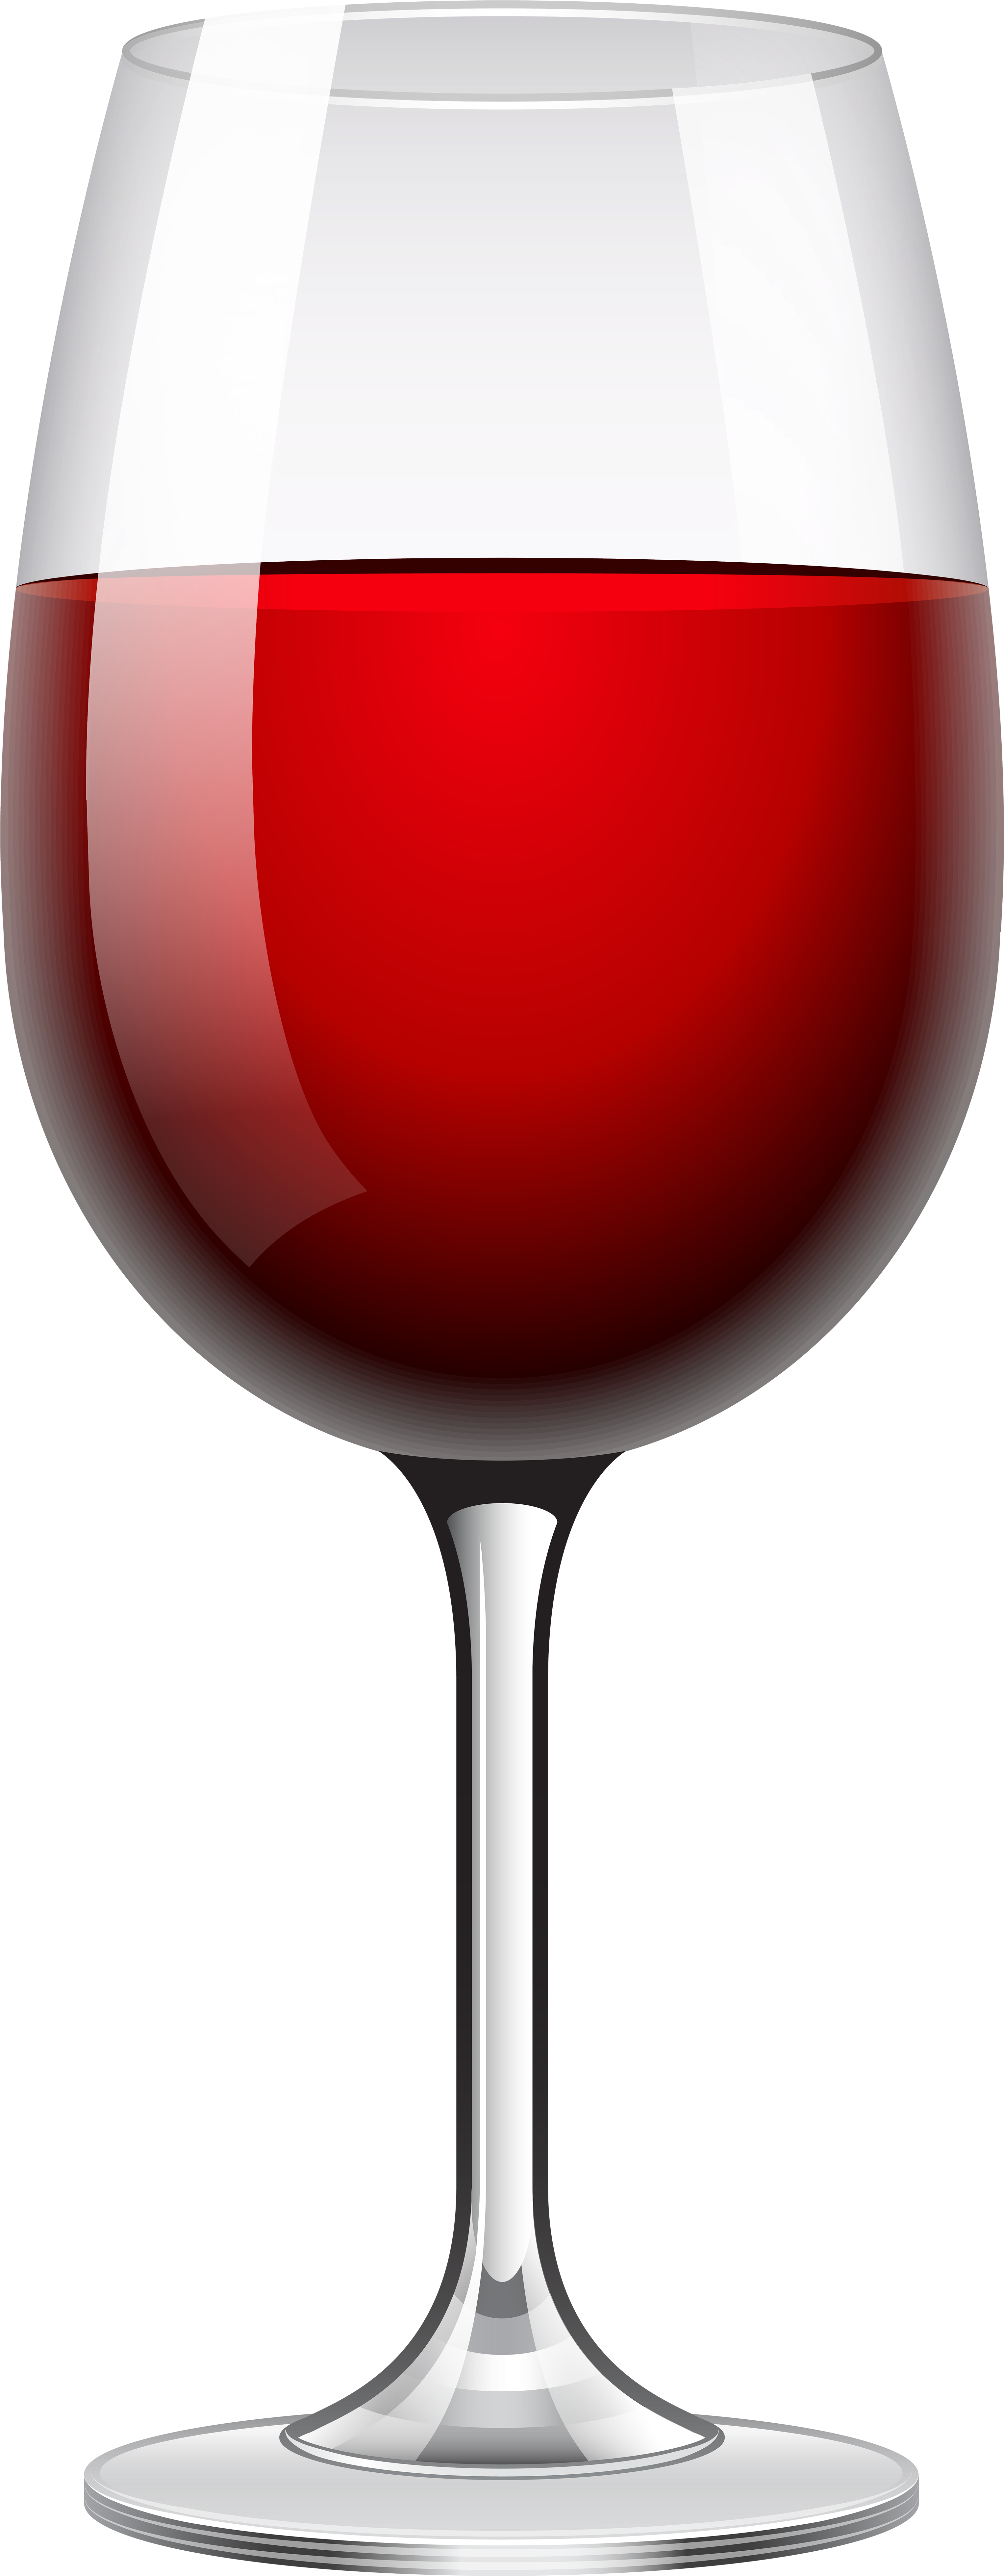 Red Wine Glass Transparent Png Clip Art Image